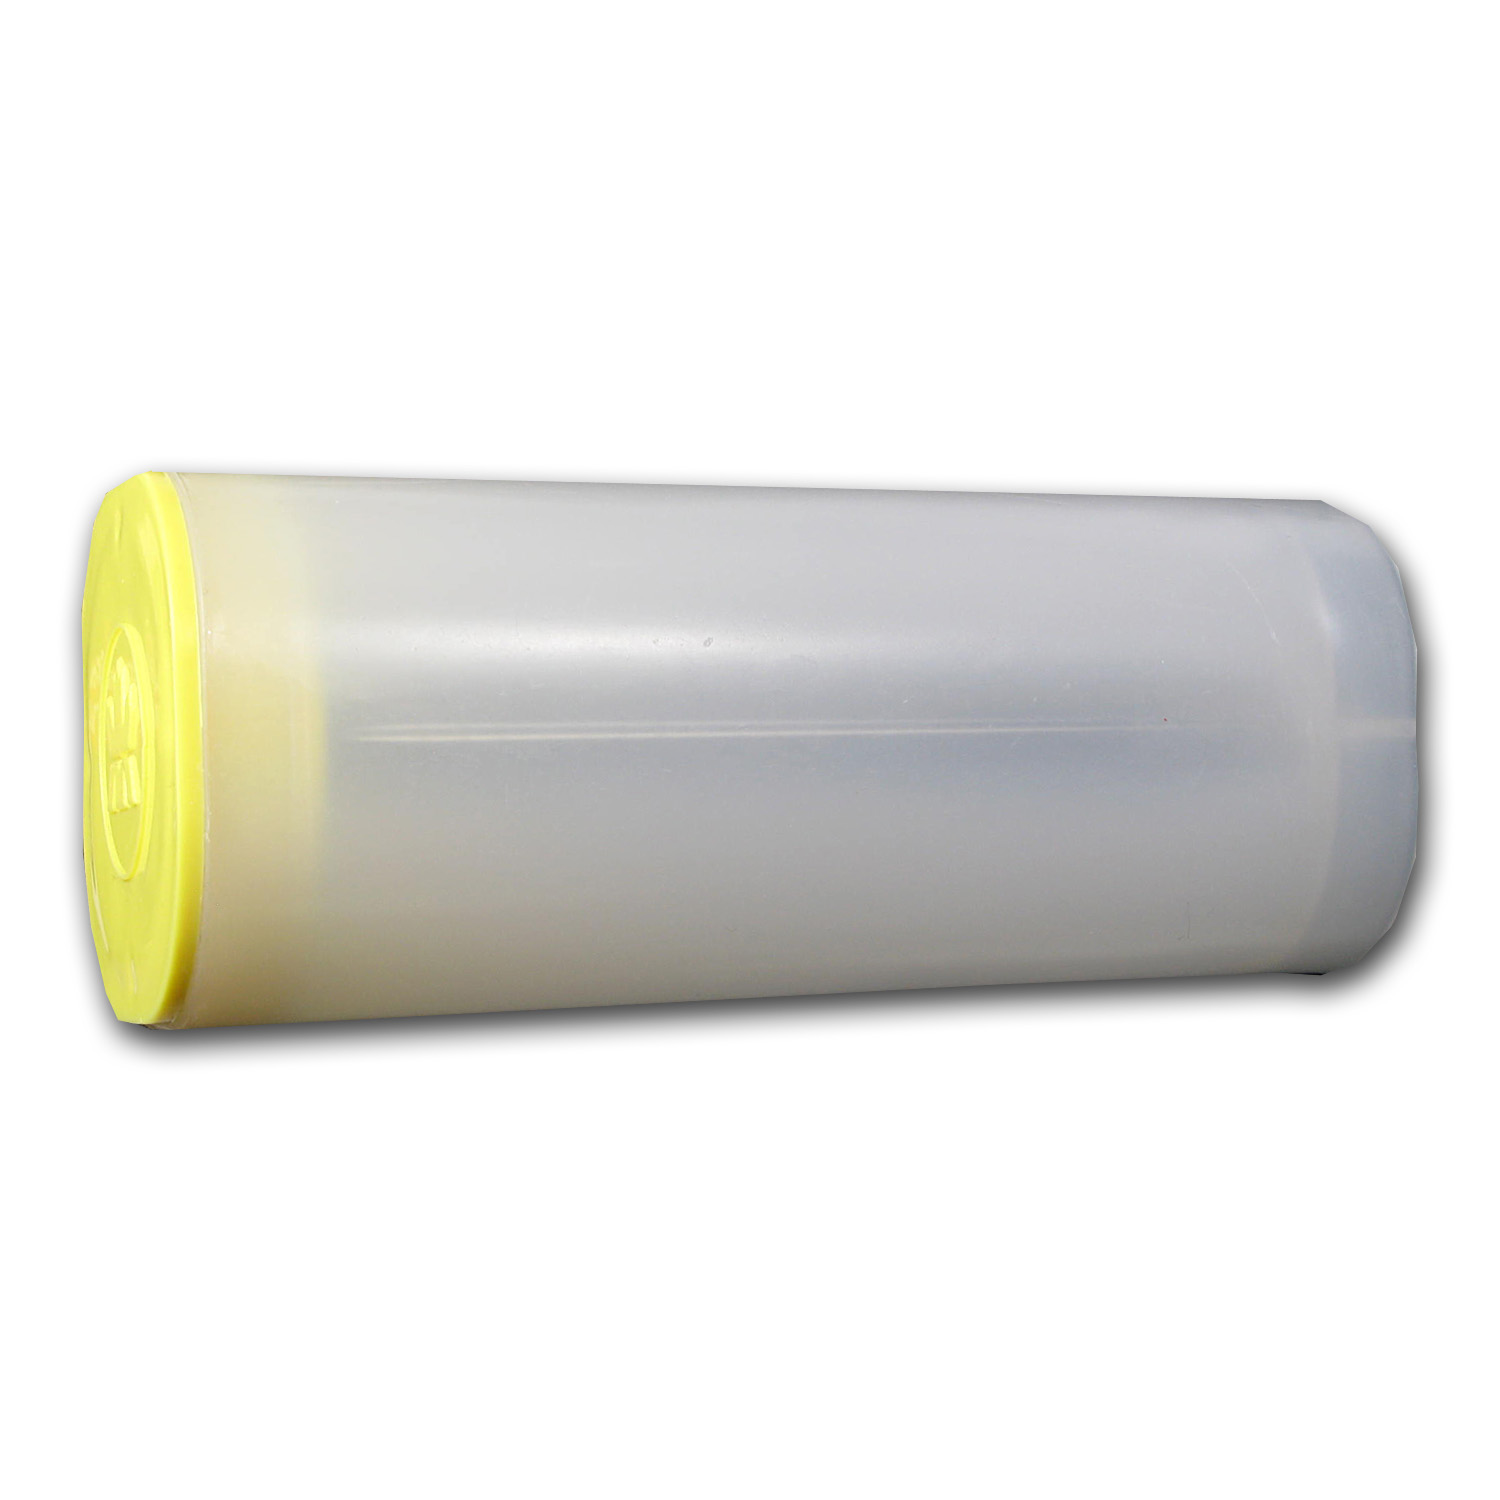 Buy 1 oz RCM Silver Maple Leaf Coin Tubes (Yellow Top) - Click Image to Close